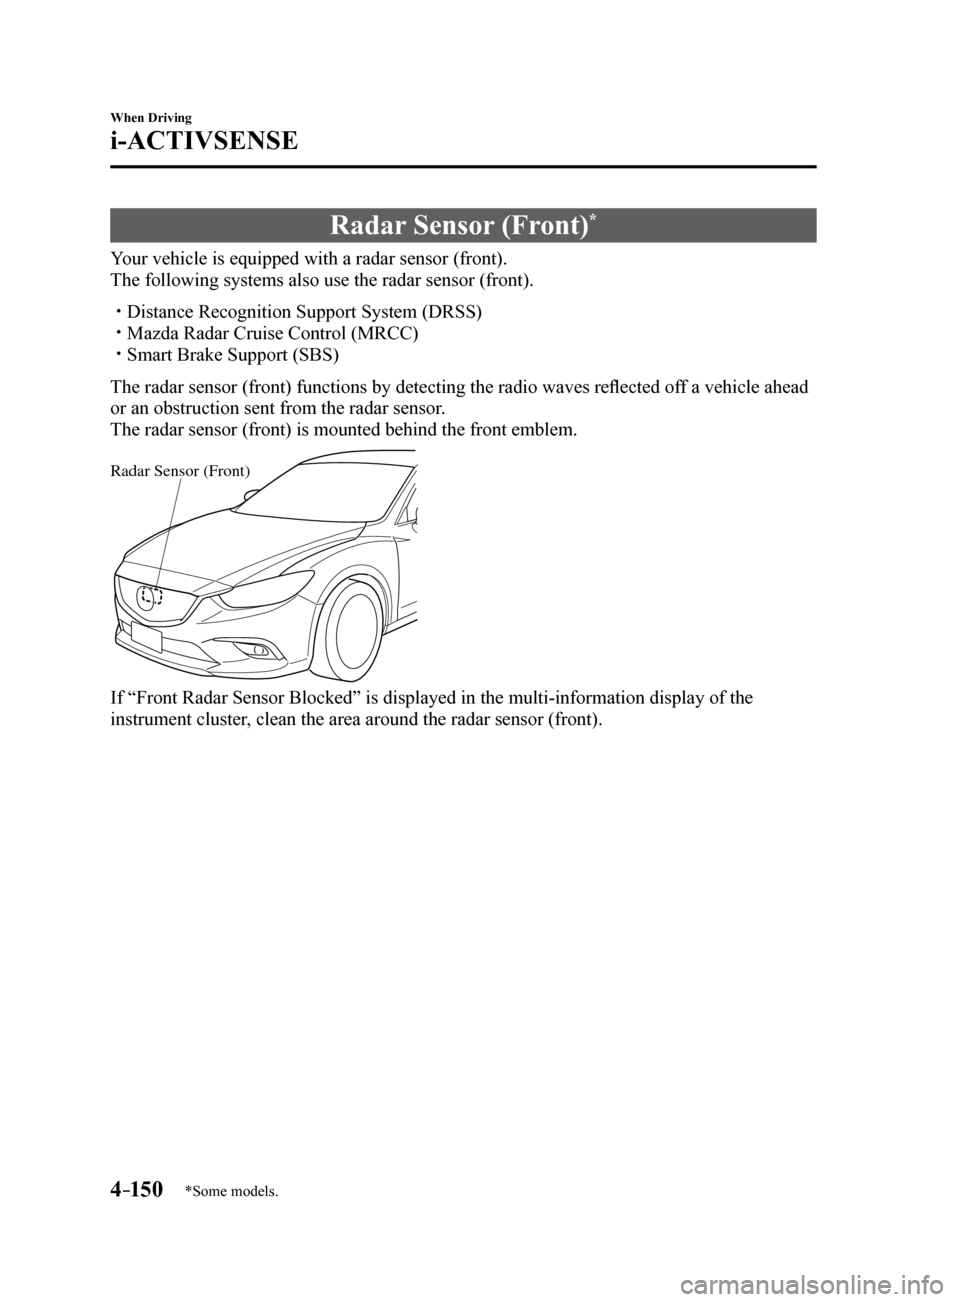 MAZDA MODEL 6 2017   (in English) Owners Guide 4–150
When Driving
i-ACTIVSENSE
*Some models.
Radar Sensor (Front)*
Your vehicle is equipped with a radar sensor (front).
The following systems also use the radar sensor (front).
 Distance Recogn